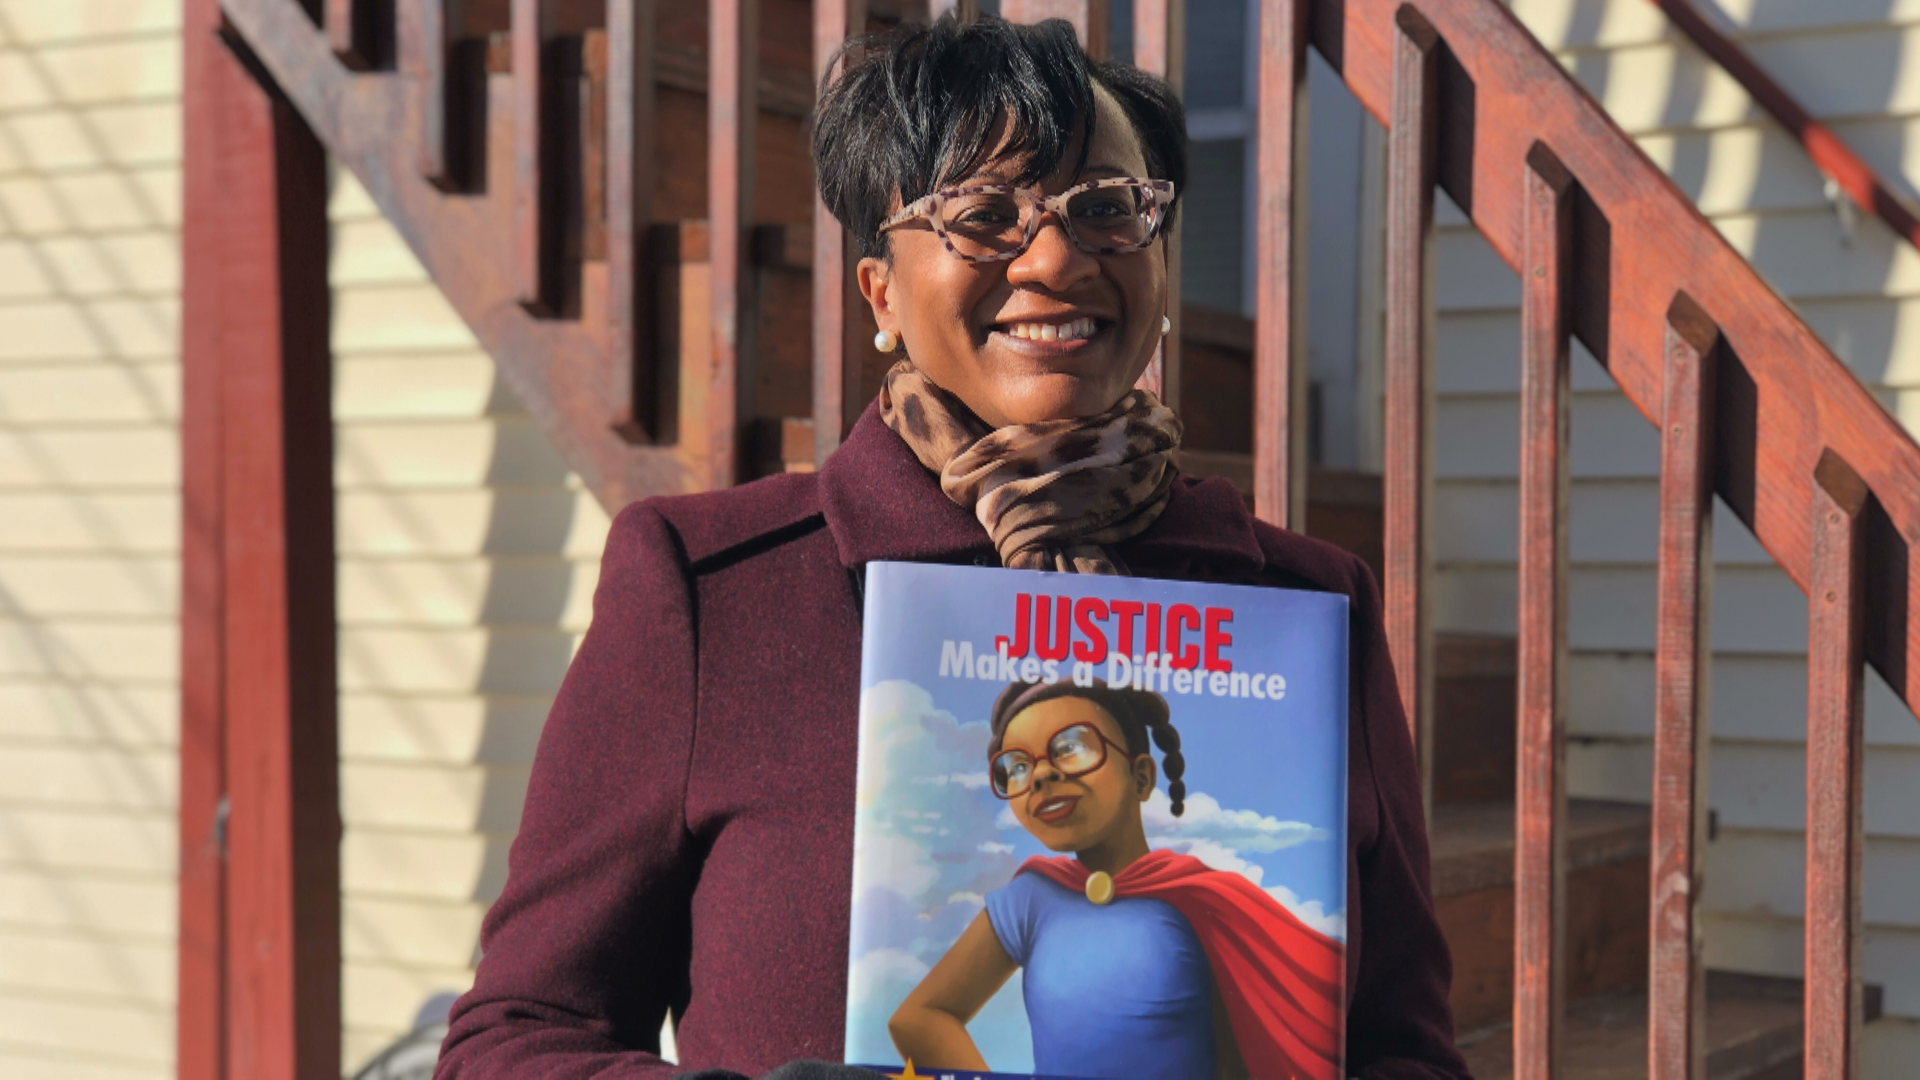 A Black-owned publishing house and bookstore is helping tell diverse stories while also getting more books in the hands of children.